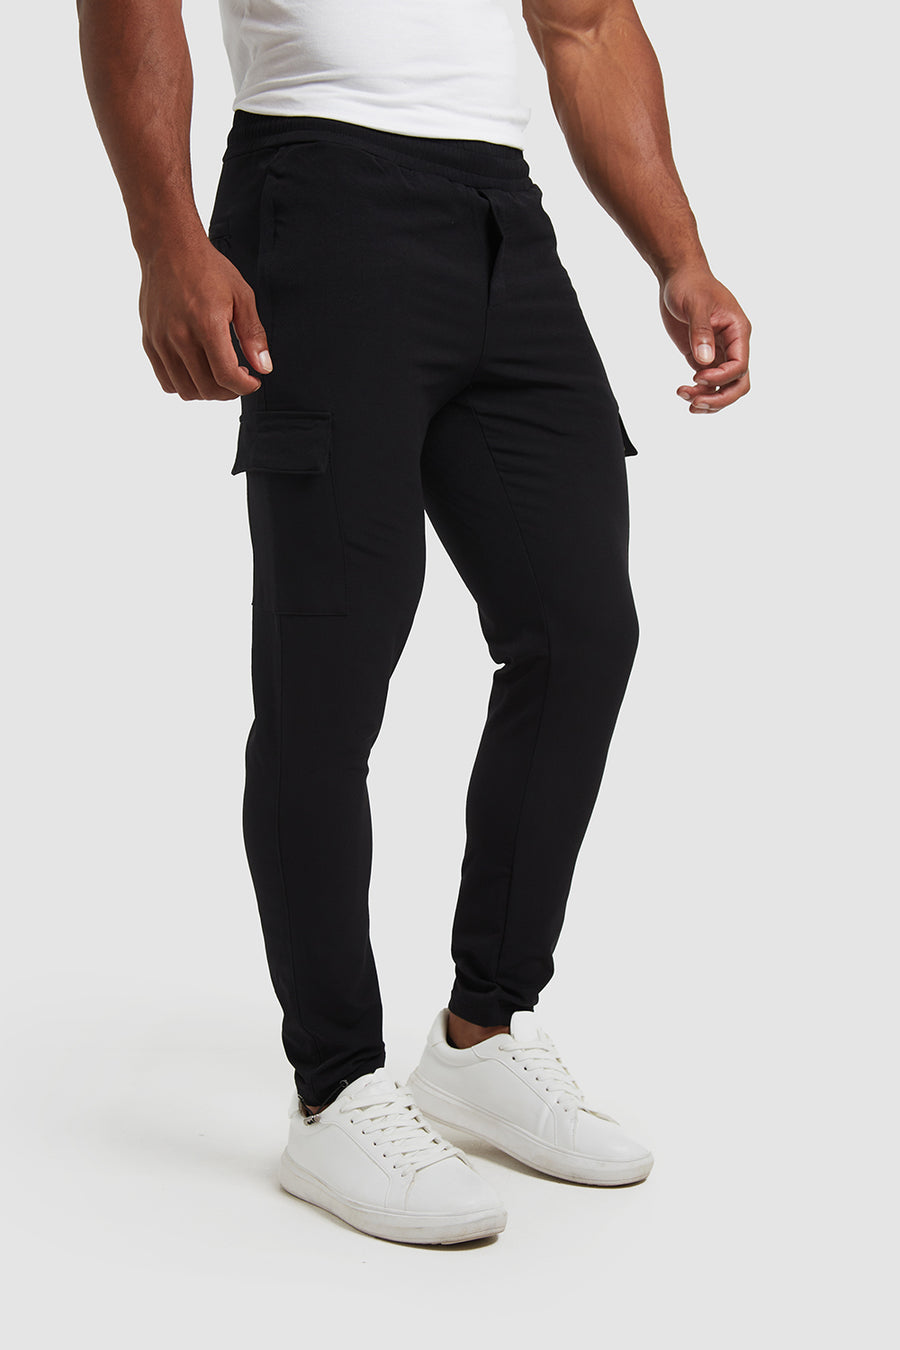 Tech Cargo Trousers in Black - TAILORED ATHLETE - USA